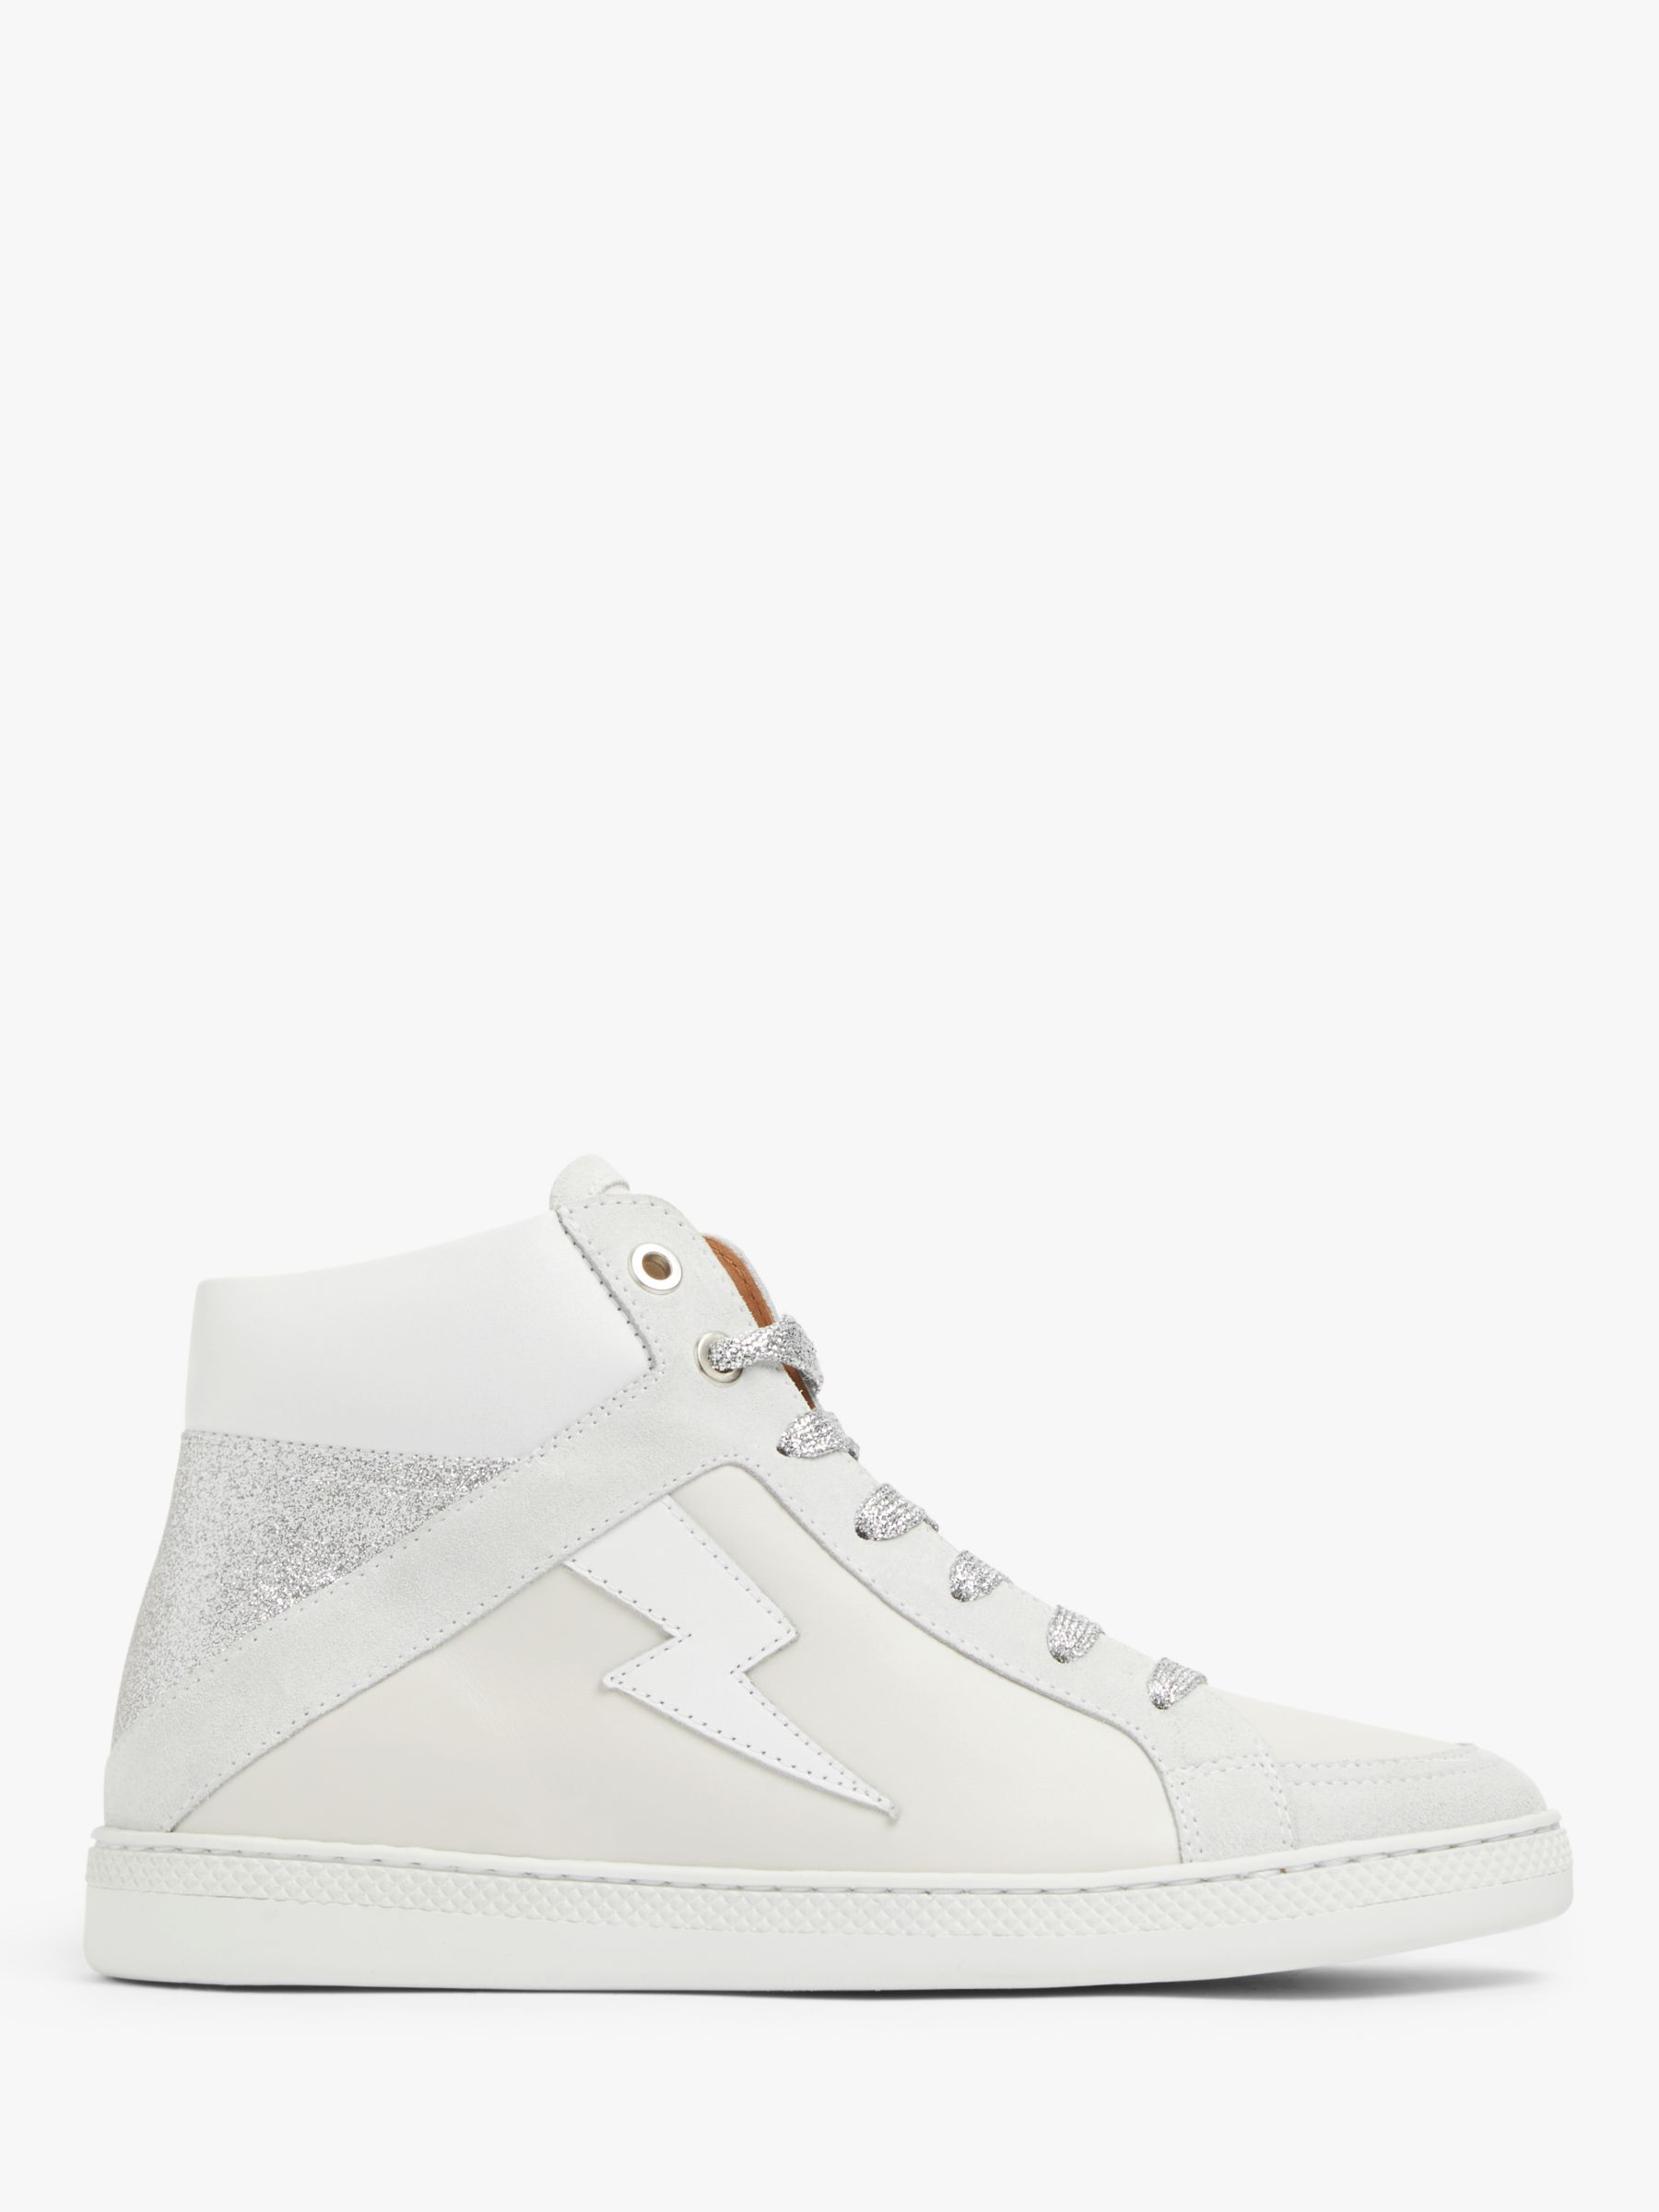 AND/OR Elvie Leather High Top Trainers